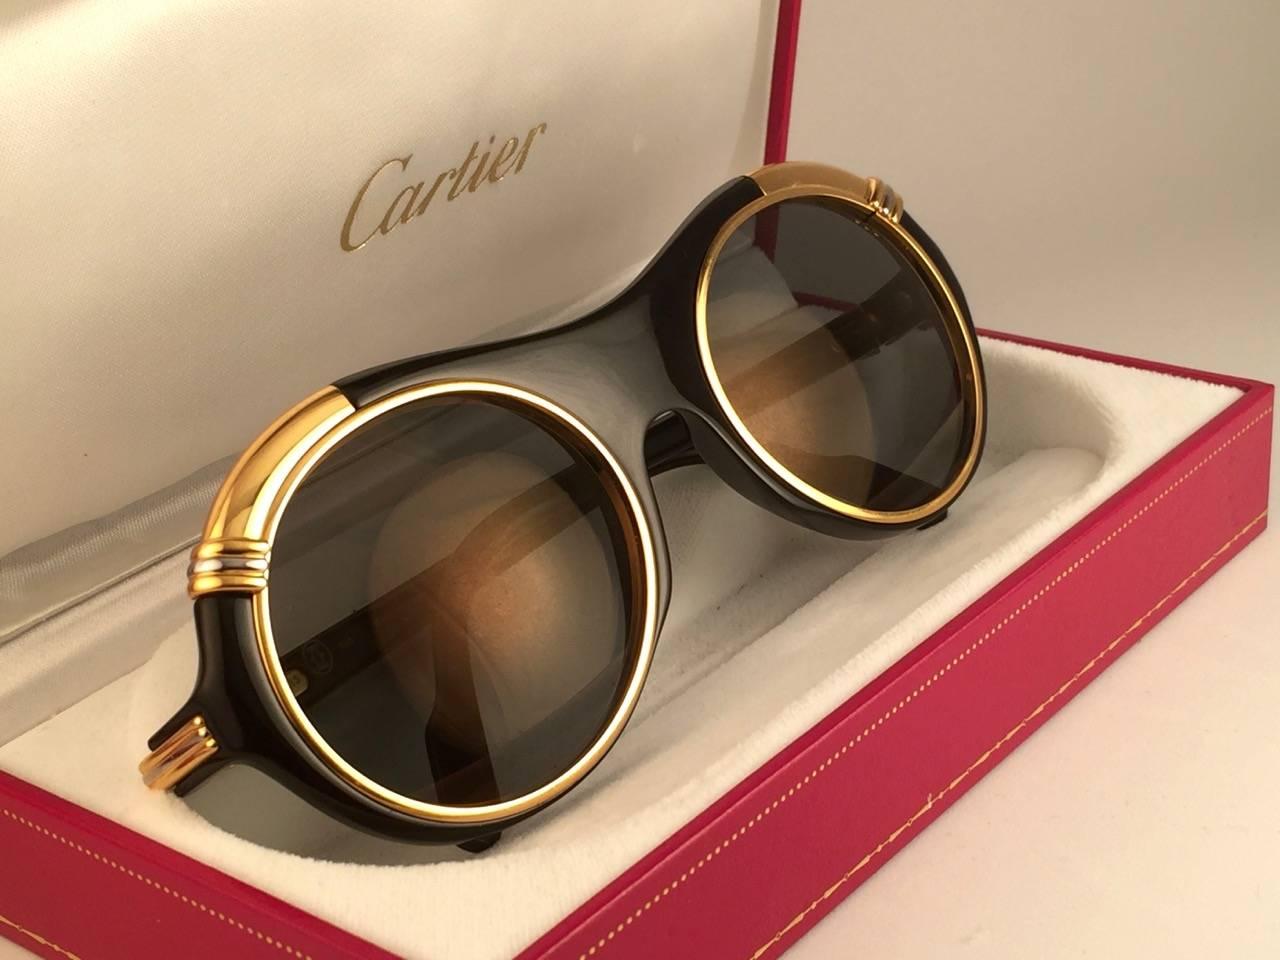 New from 1991 Original Cartier Diabolo Art Deco Sunglasses with spotless amazing brown gold mirrored (uv protection). 
Frame has the famous real gold and white gold accents in the middle and on the sides.
All hallmarks. Cartier gold signs on the